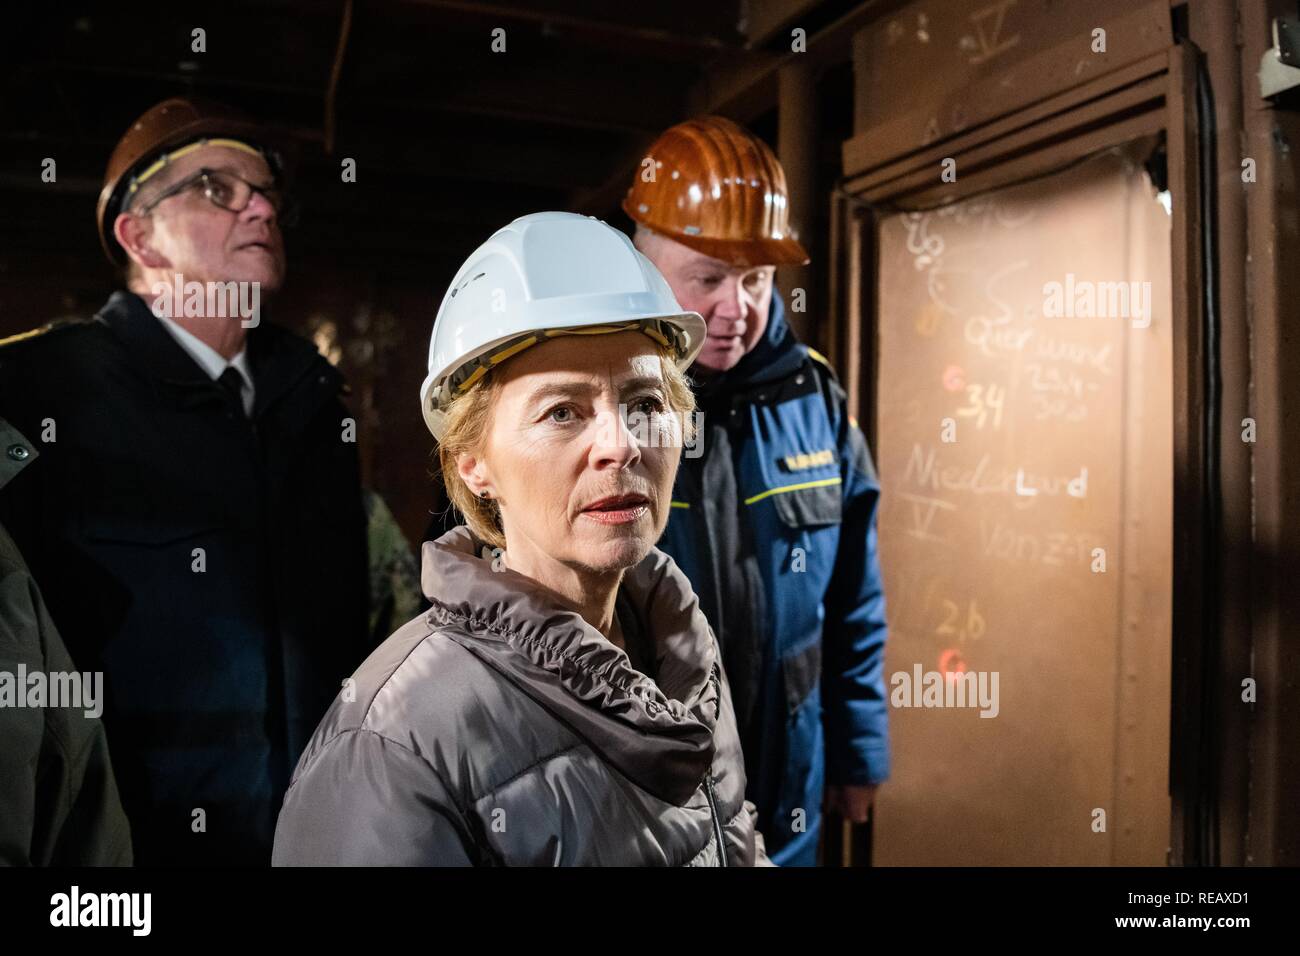 Bremerhaven, Germany. 21st Jan, 2019. Federal Defence Minister Ursula von der Leyen (CDU) is led through the ship by Nils Brandt (r), commander of the Gorch Fock. During her visit, the Minister informed herself about the status of the repair work and spoke with crew members. Von der Leyen wants to decide within a few weeks on the future of the ailing sailing training ship. Credit: Mohssen Assanimoghaddam/dpa/Alamy Live News Stock Photo